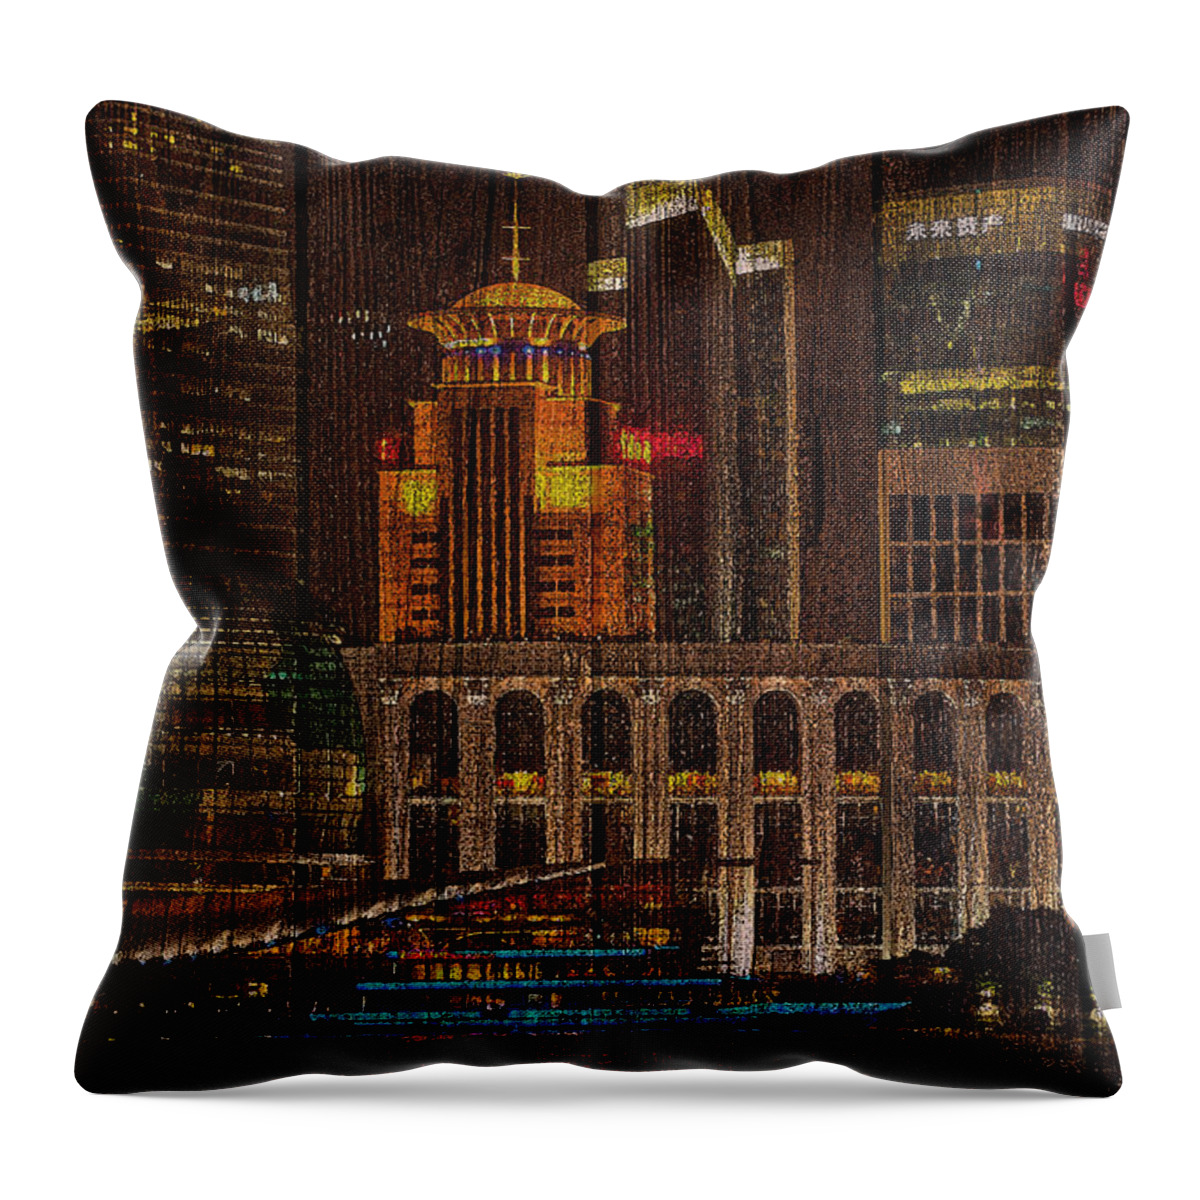 Shanghai Throw Pillow featuring the mixed media Skyline of Shanghai, China on Wood by Alex Mir